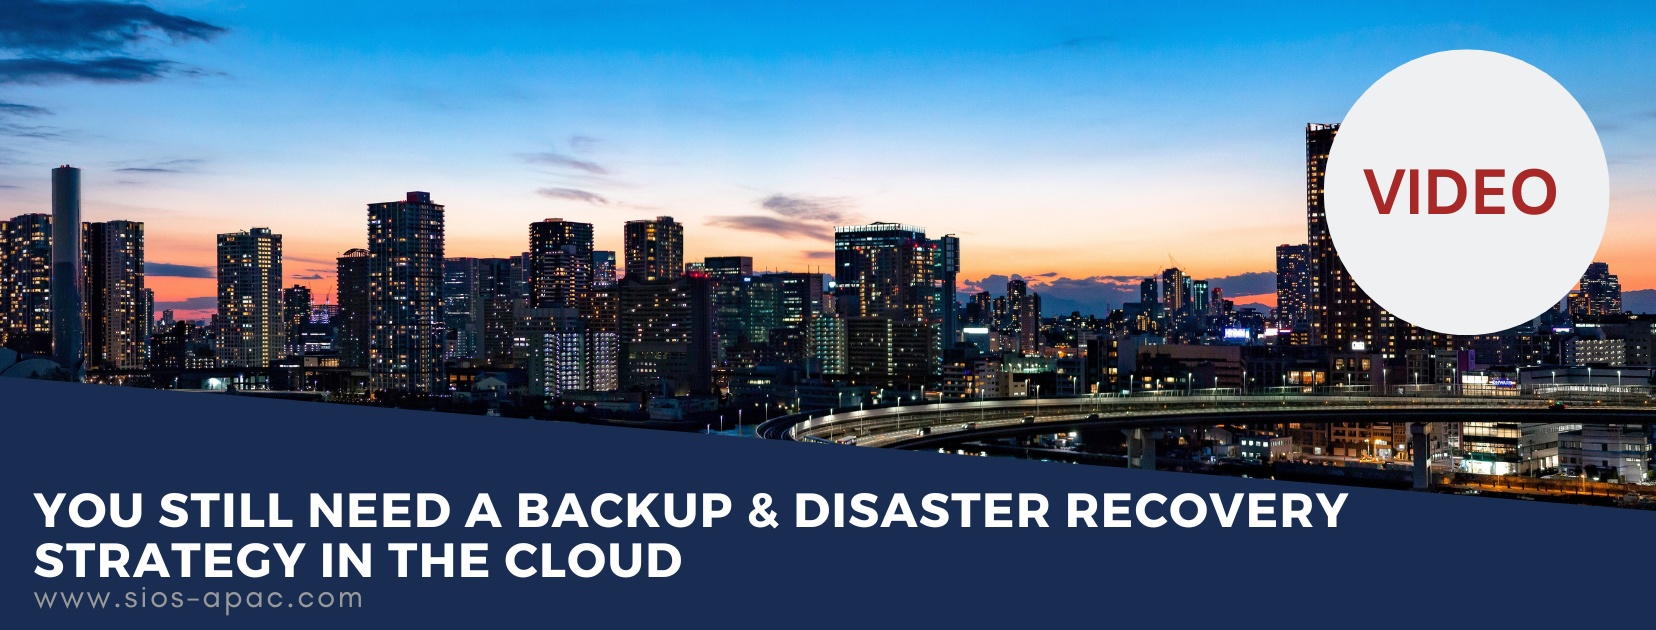 You Still Need A Backup & Disaster Recovery Strategy In The Cloud